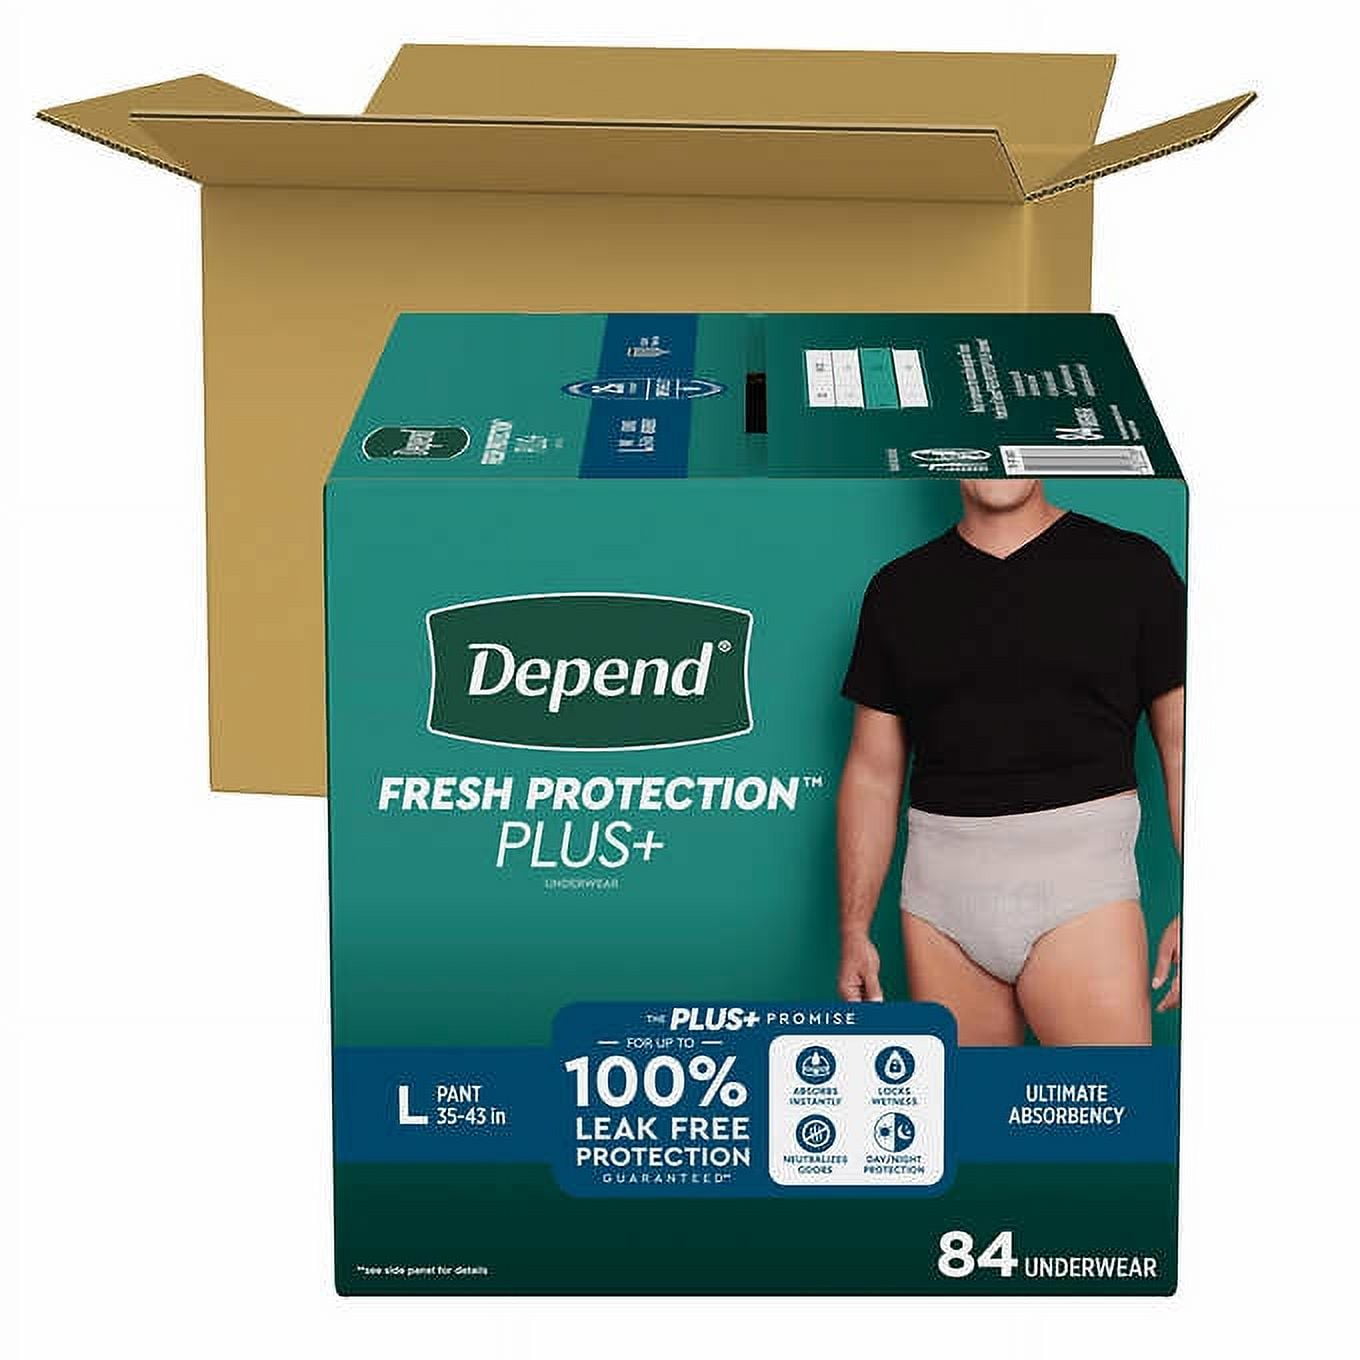 Depend Fresh Protection Adult Incontinence Underwear for Women, Maximum,  XL, Blush, 68Ct